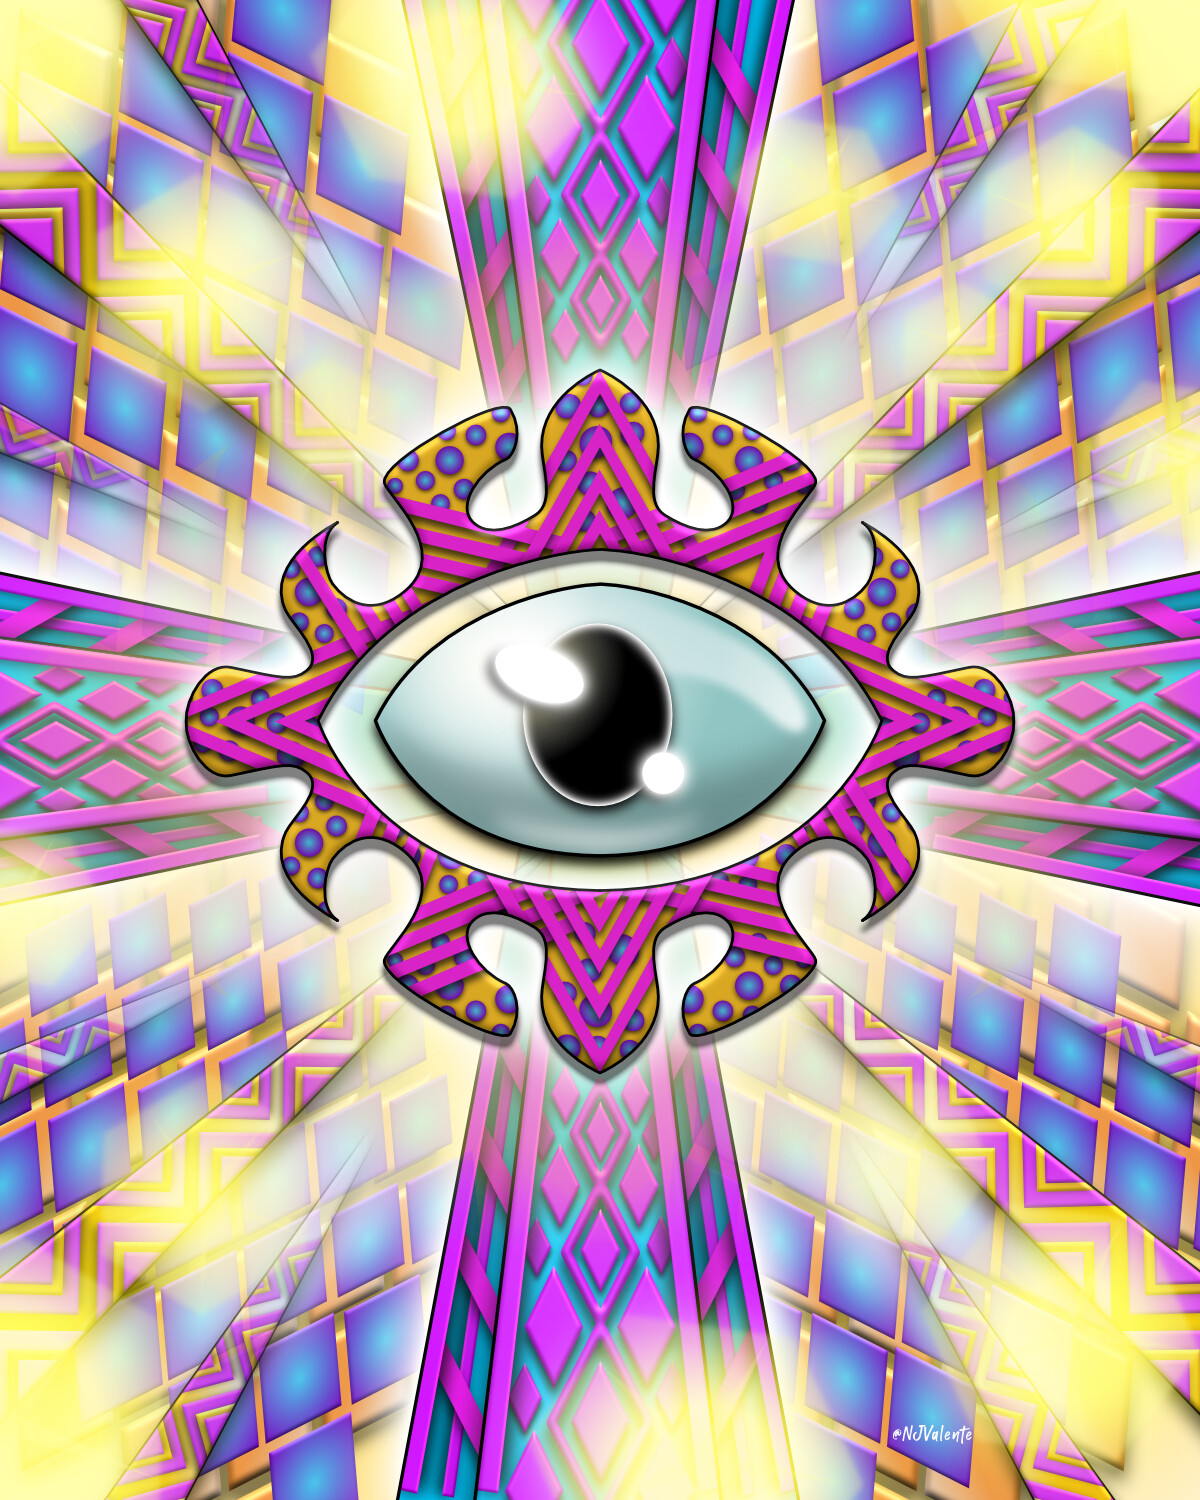 All Seeing Eye, done in Affinity Designer.